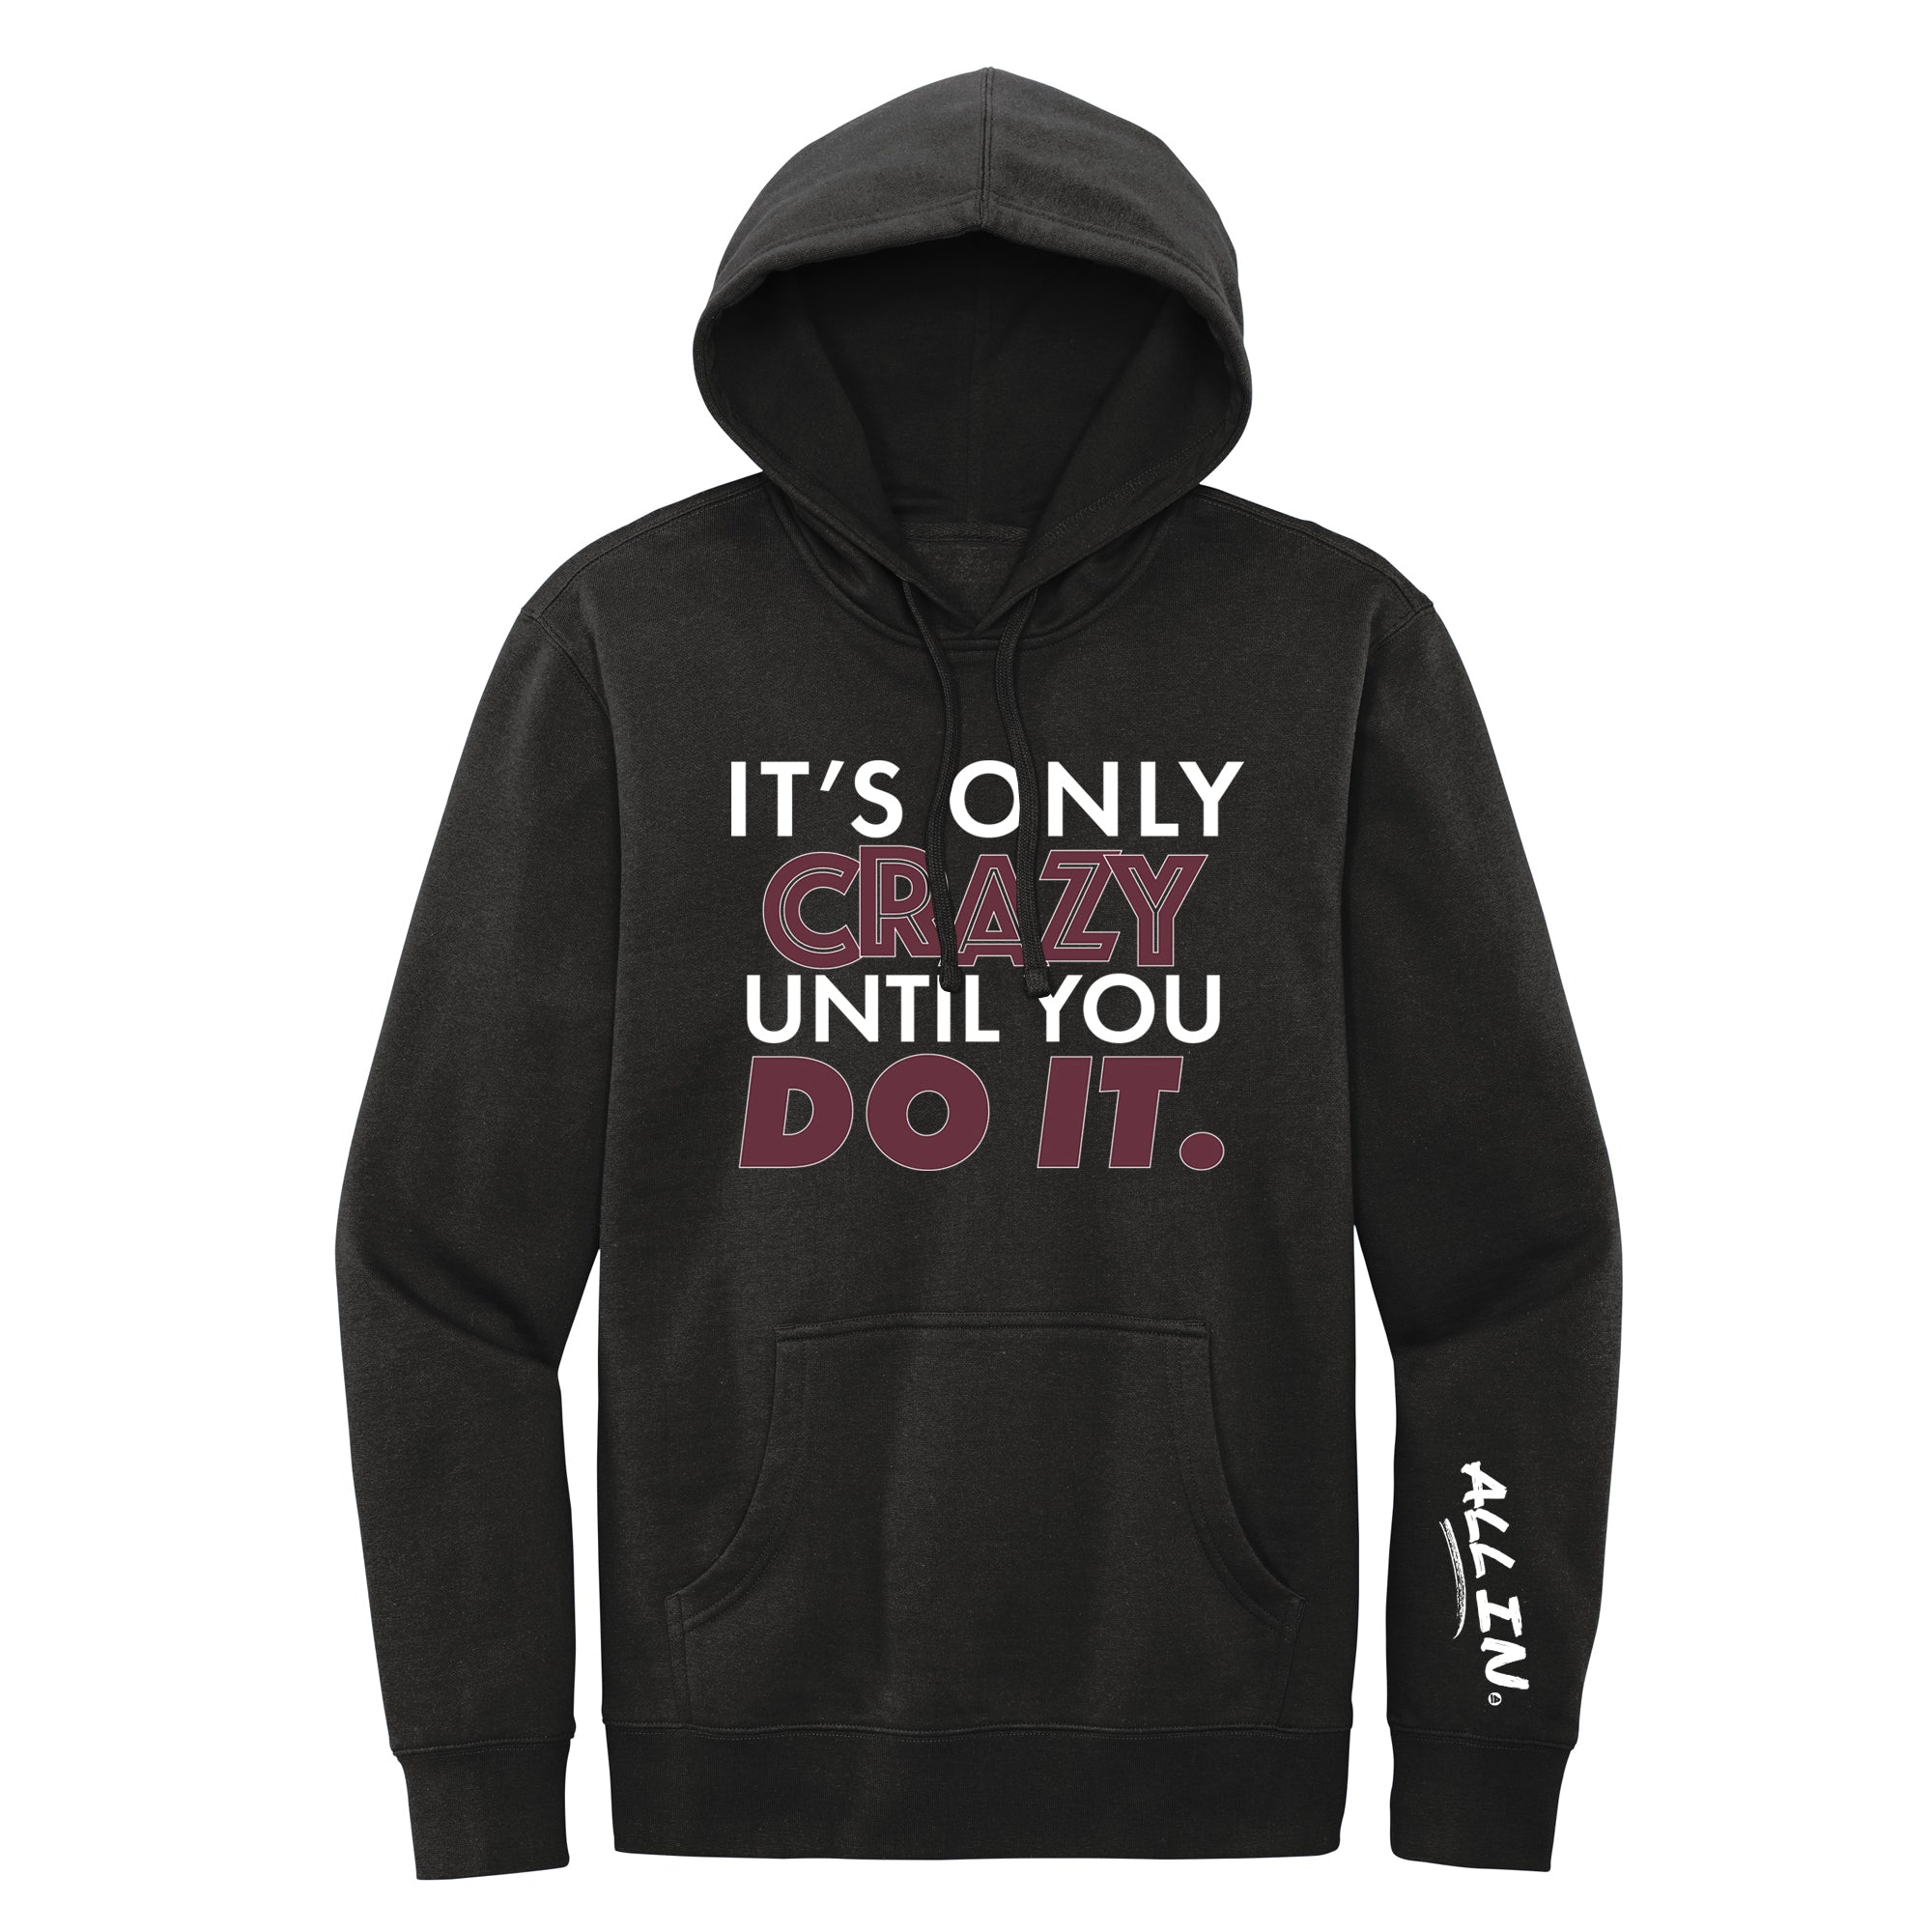 "It's Only Crazy Until You Do It" Hoodie- Benefitting The US Olympic and Paralympic Foundation